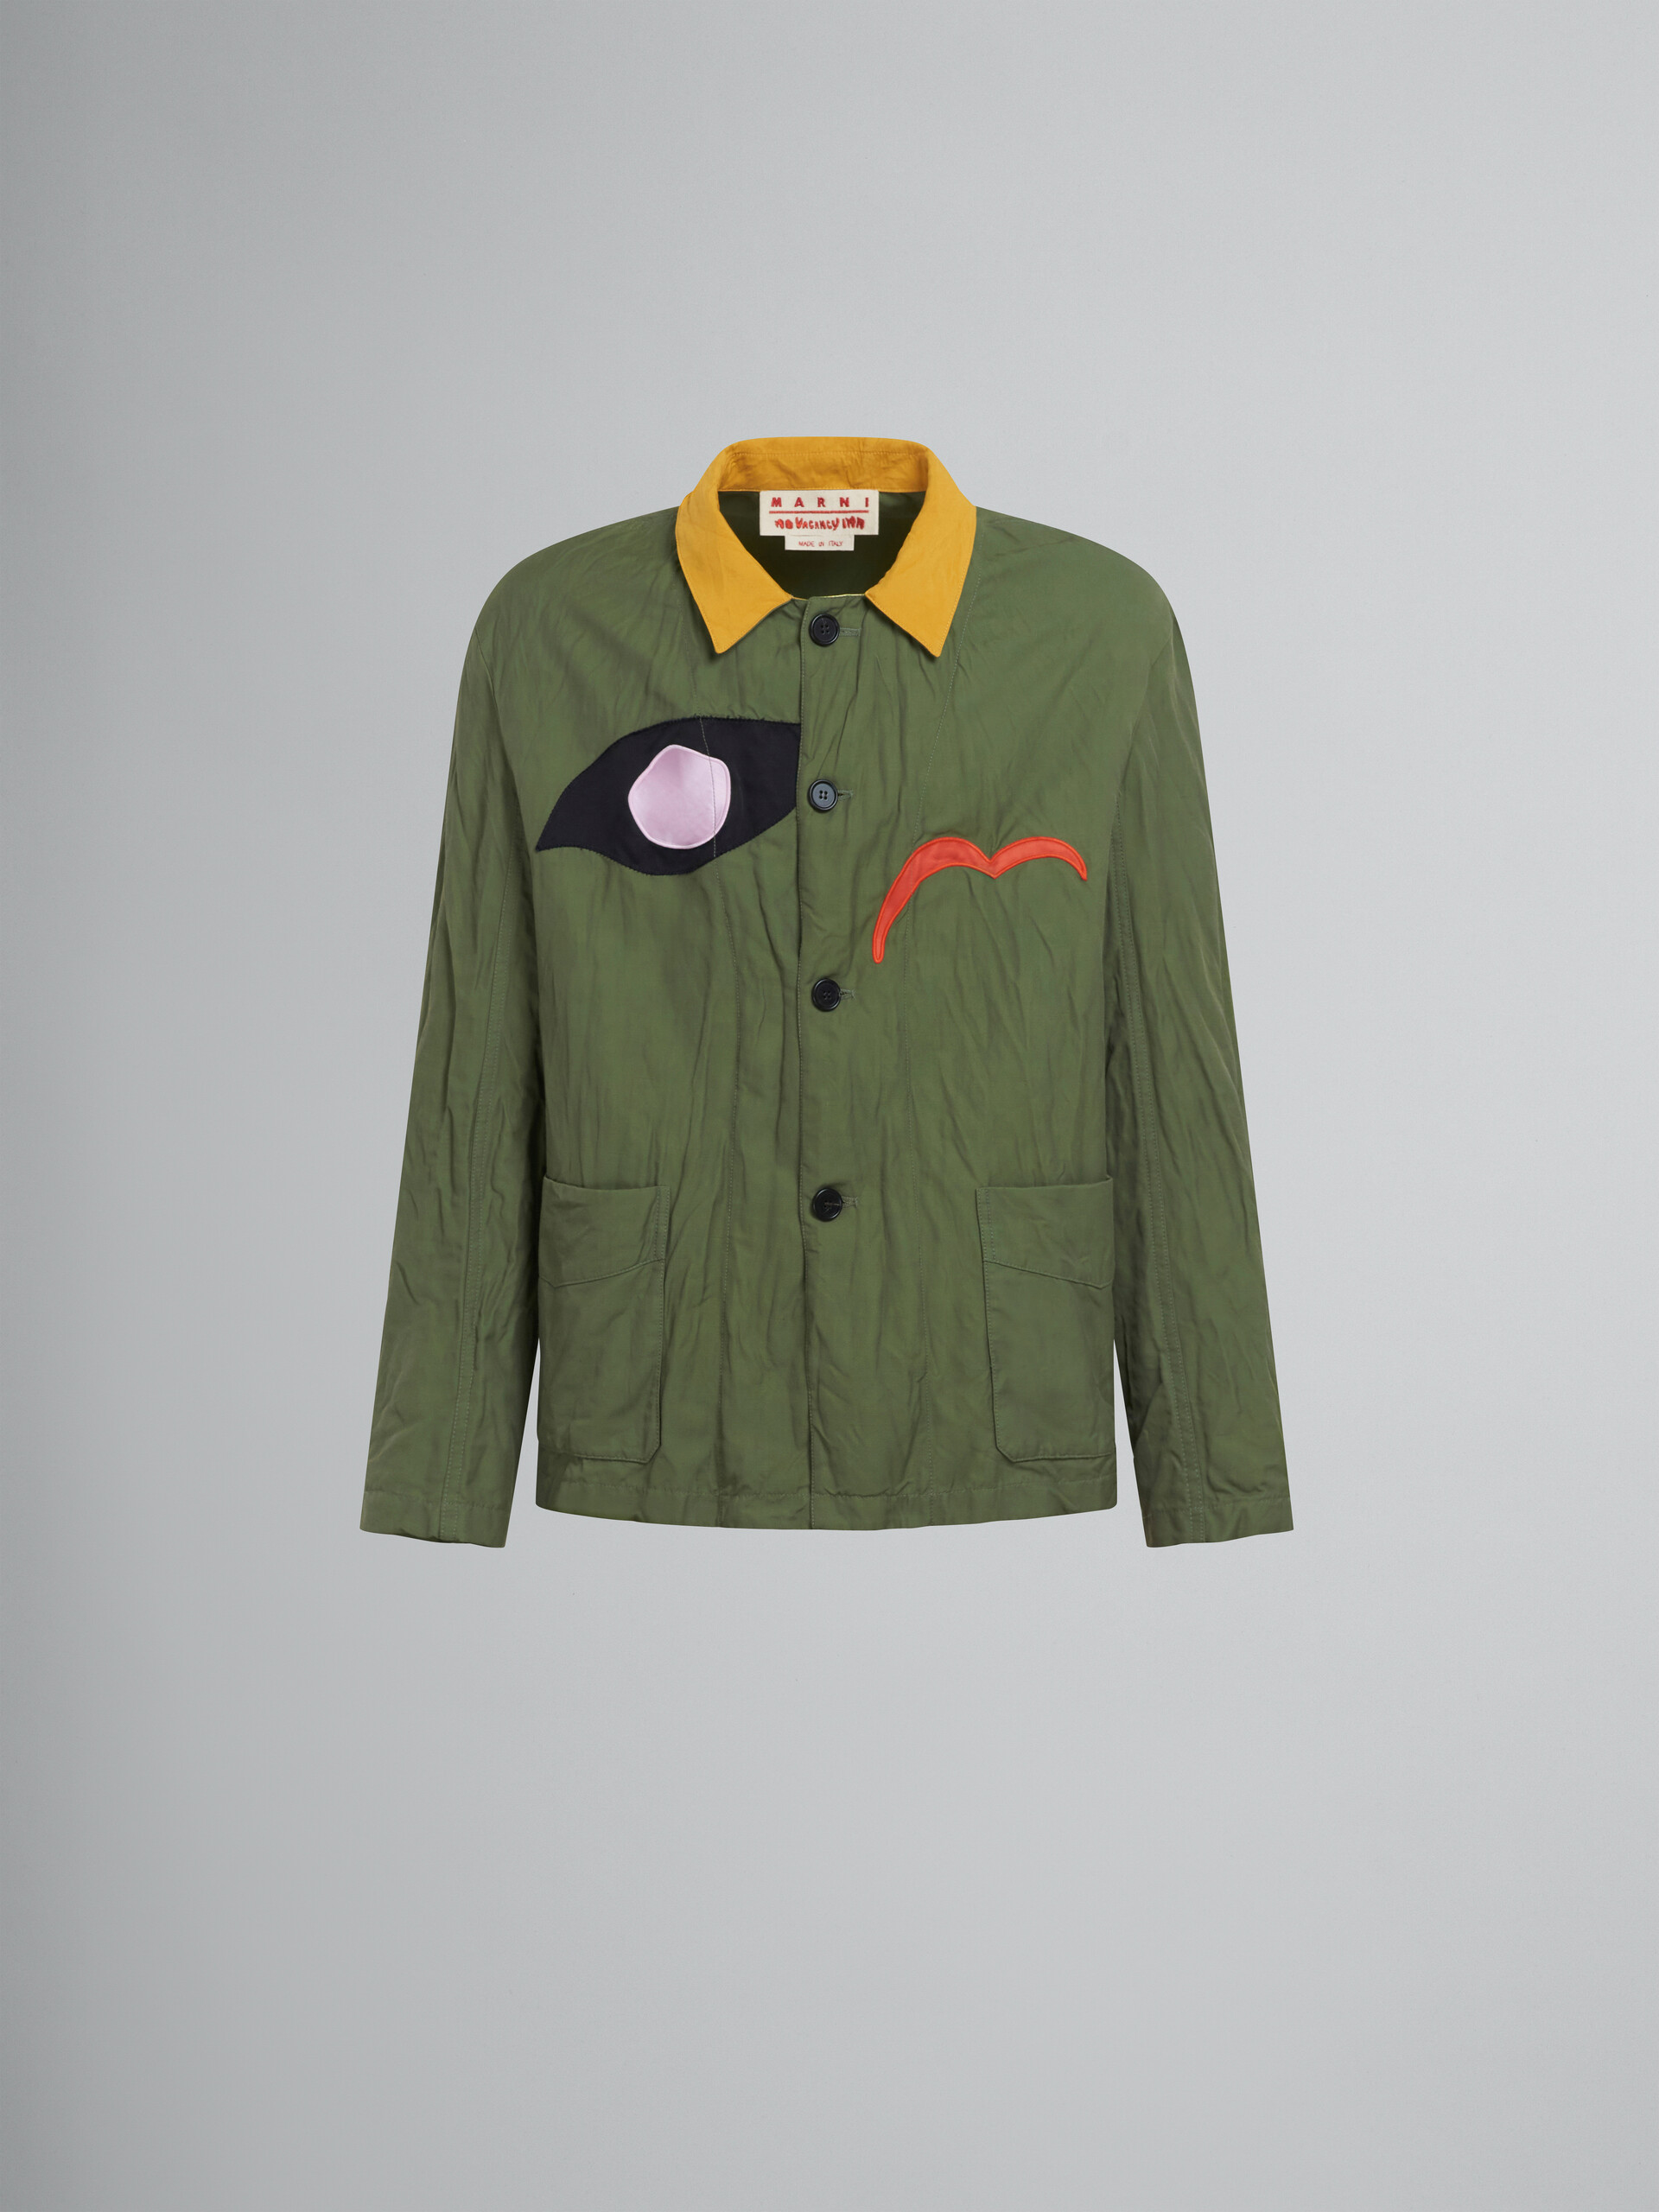 Marni x No Vacancy Inn - Green gabardine jacket with embroidered patches - Jackets - Image 1